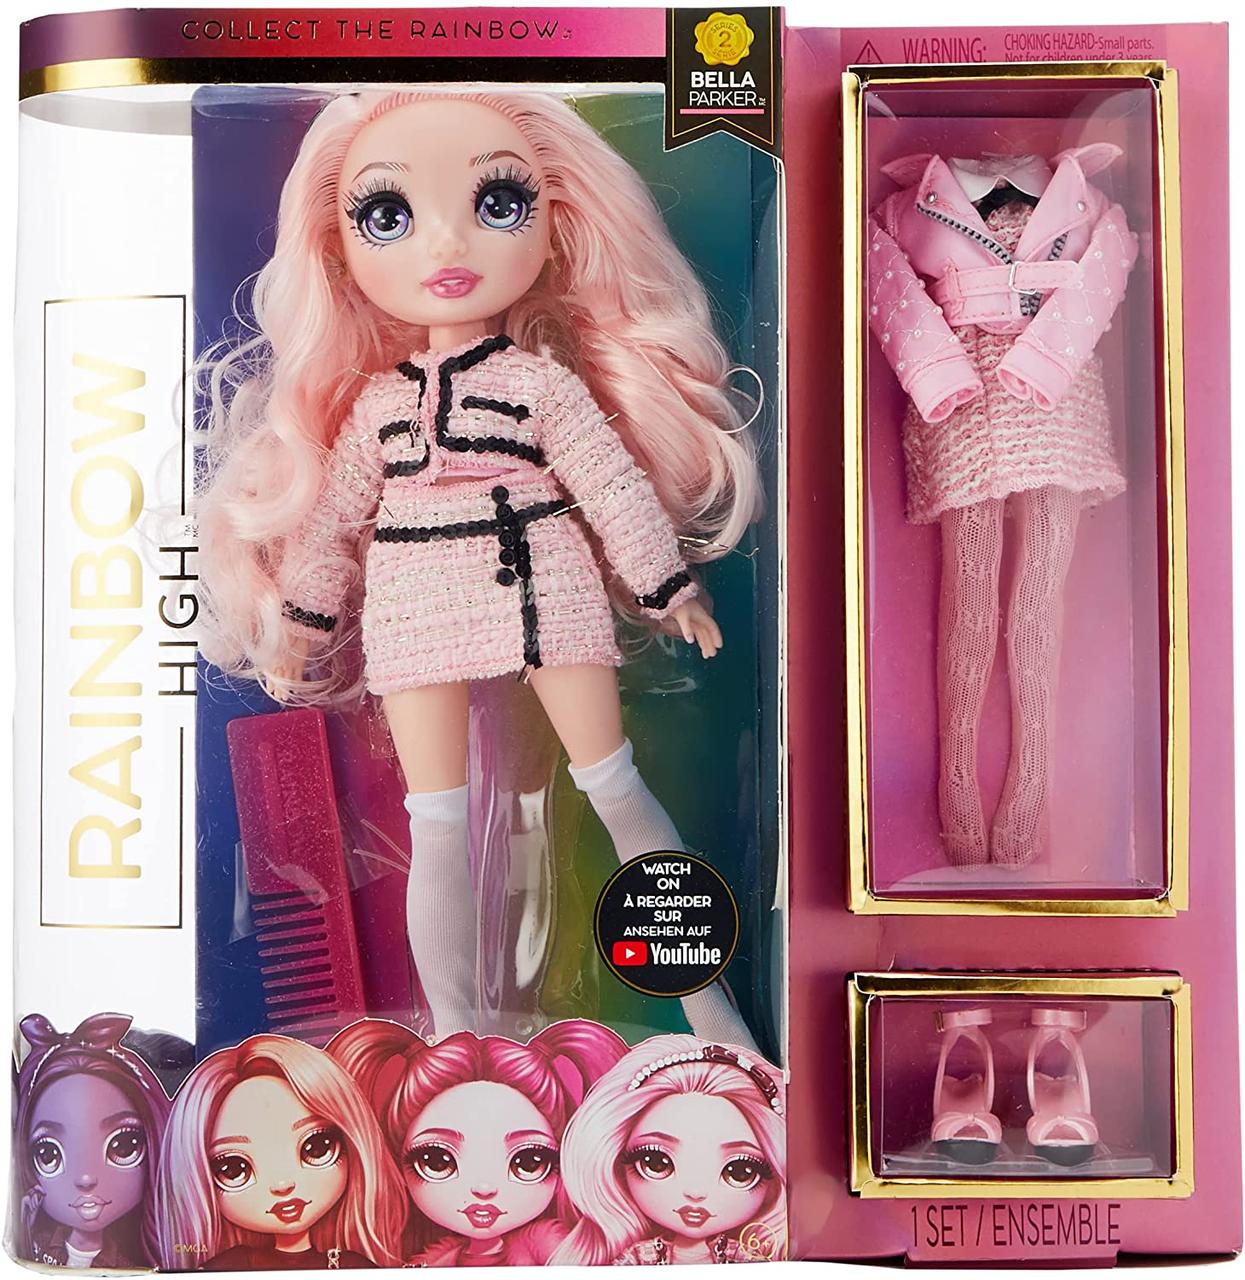 Rainbow High Bella Parker – Pink Fashion Doll with 2 Complete Doll Outfits to Mix & Match. Кукла Белла Паркер